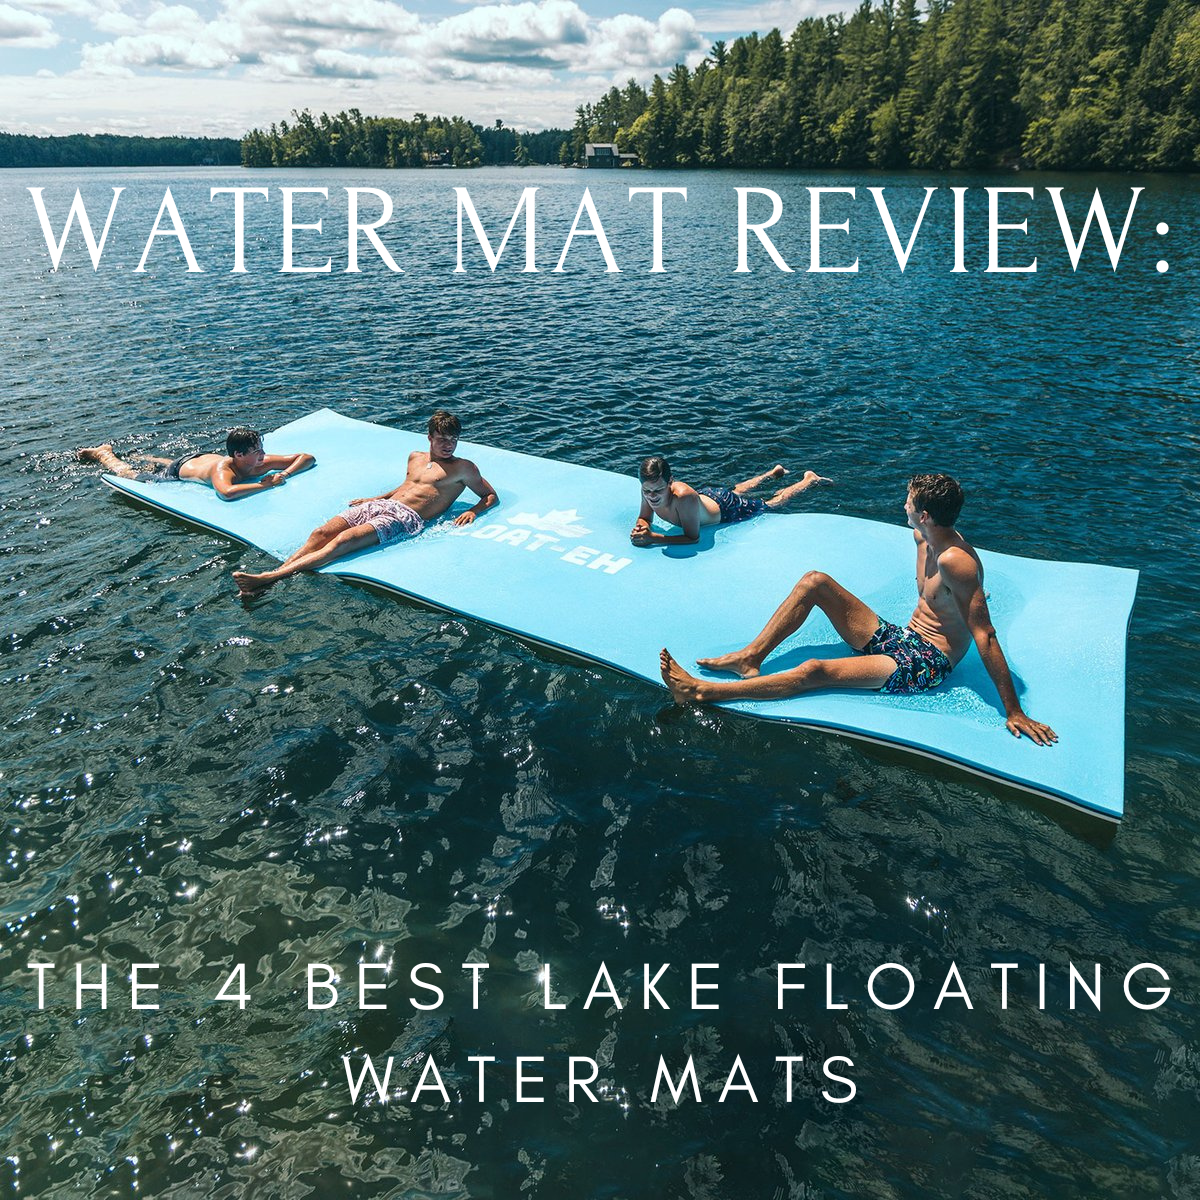 WATER MAT REVIEW: THE 4 BEST LAKE FLOATING WATER MATS - Lakefront